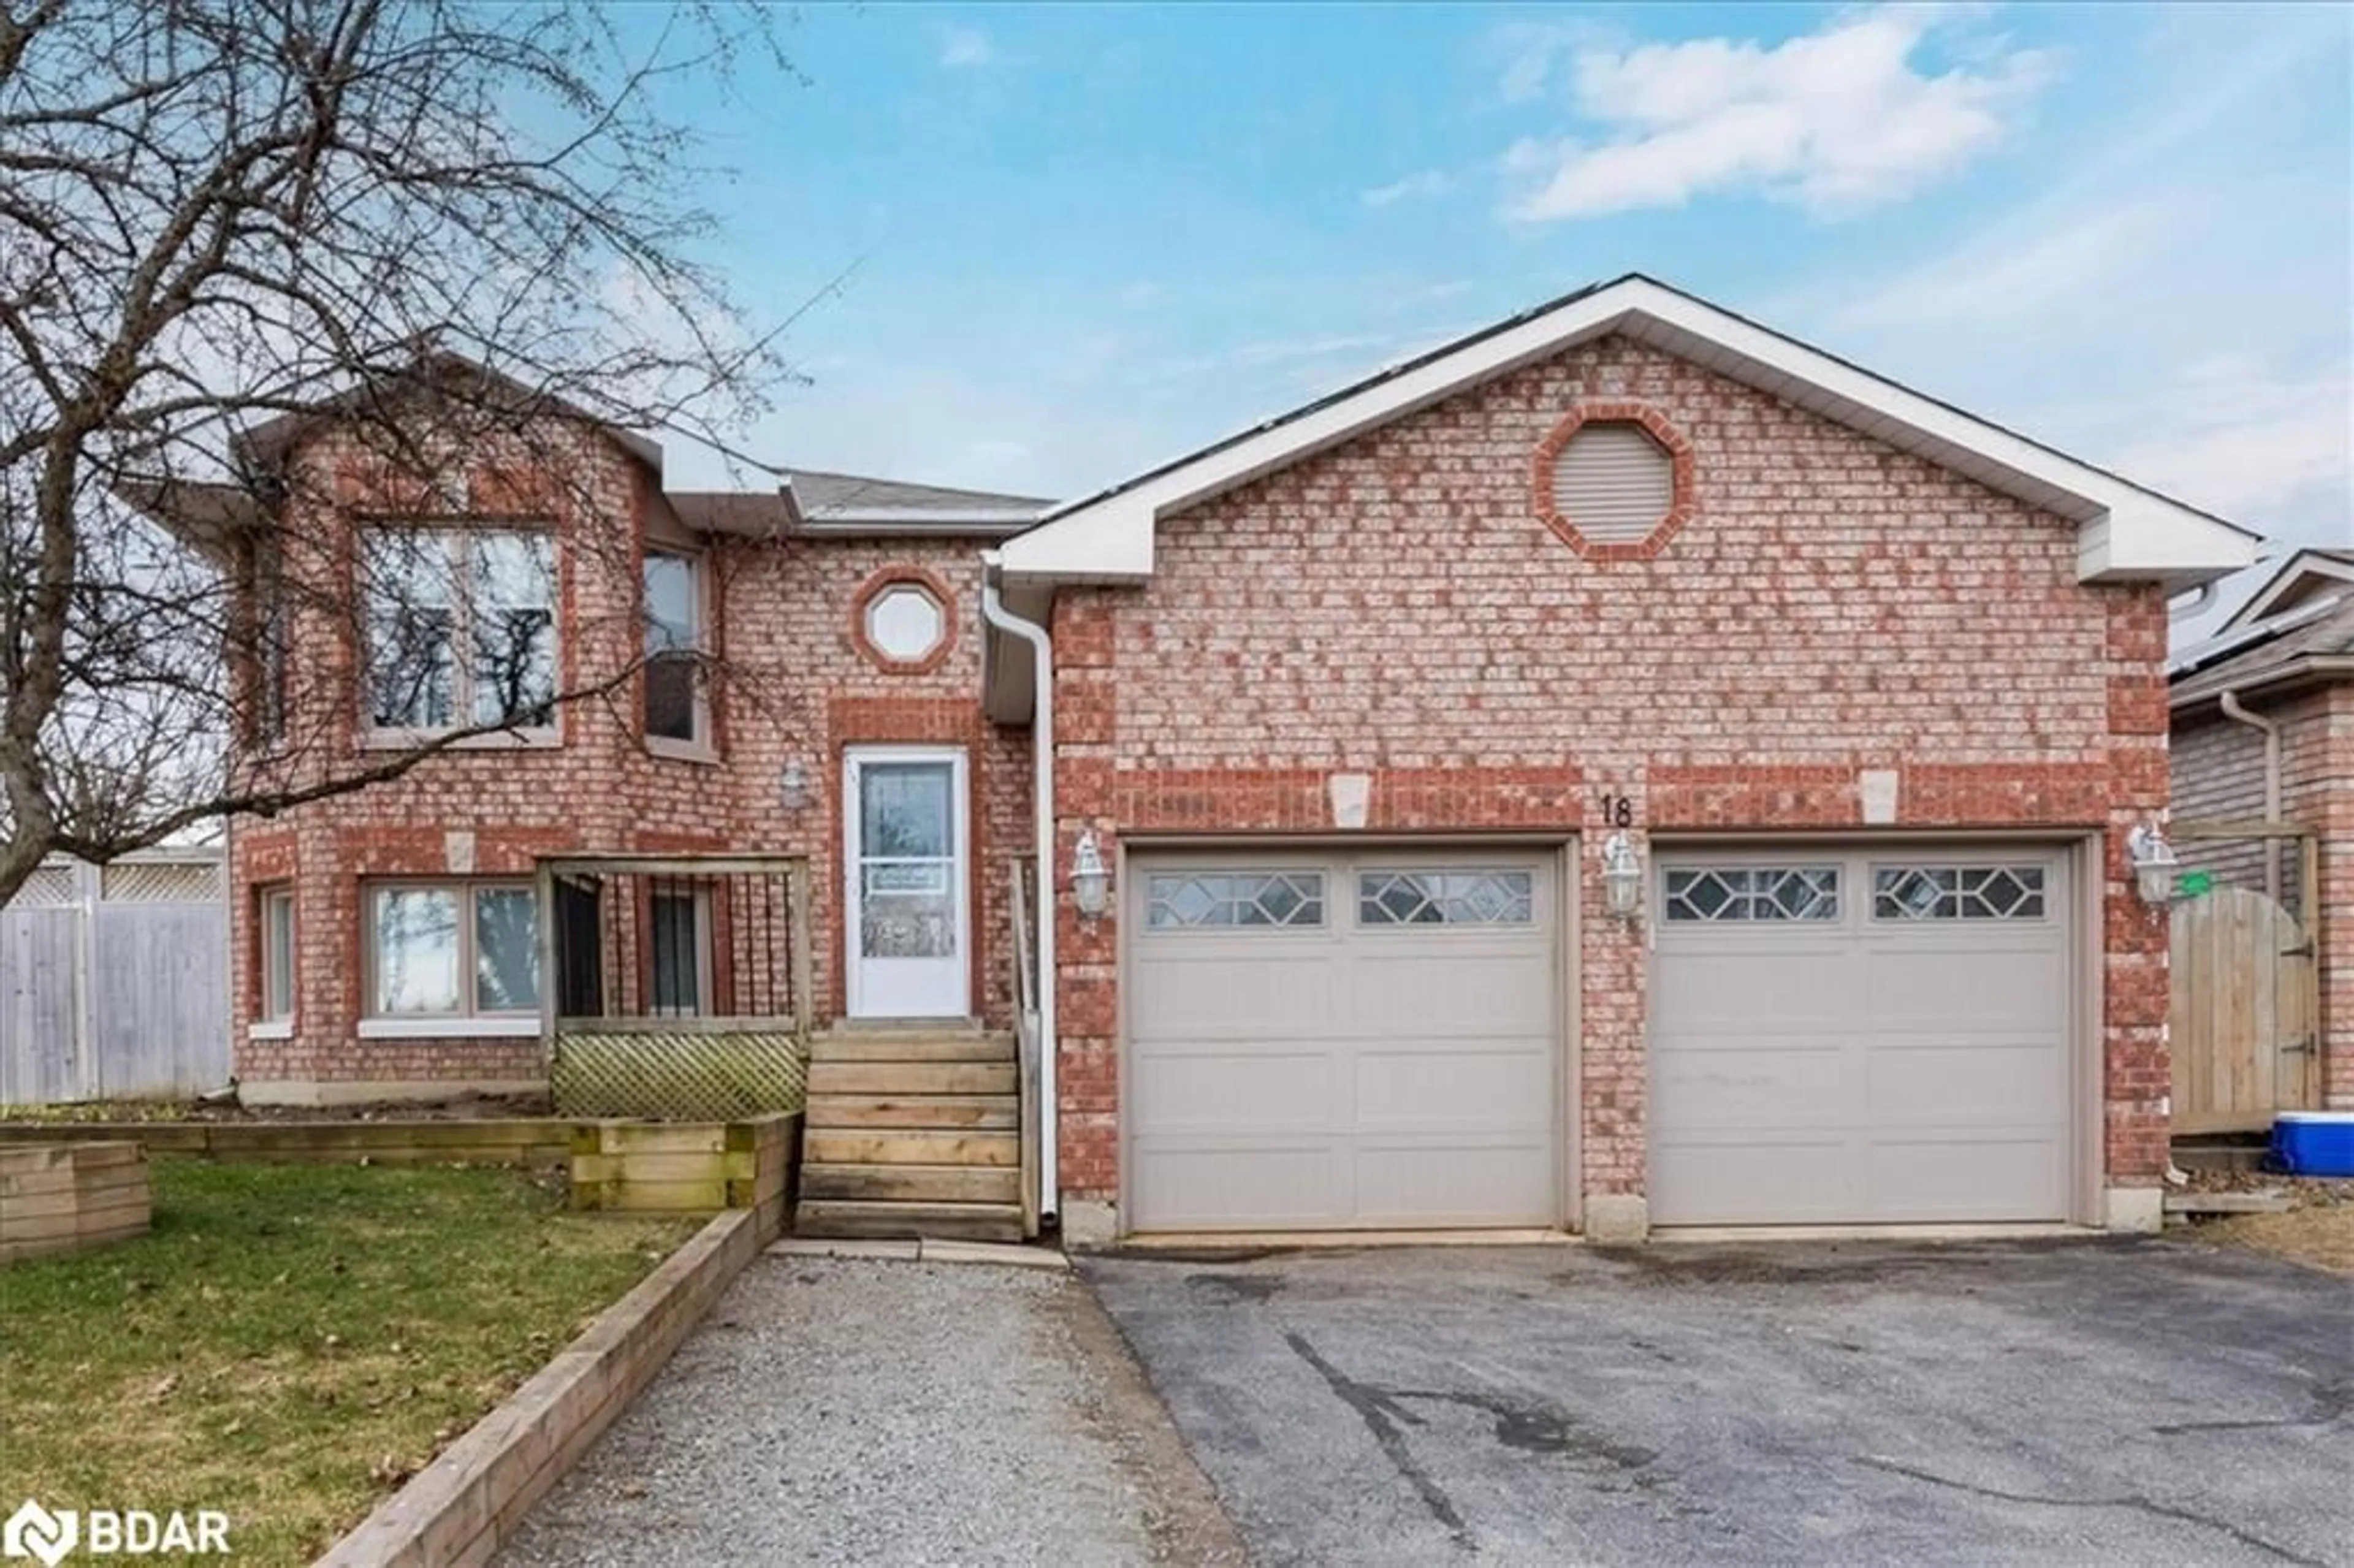 Home with brick exterior material for 18 Nugent Crt, Barrie Ontario L4N 7A9